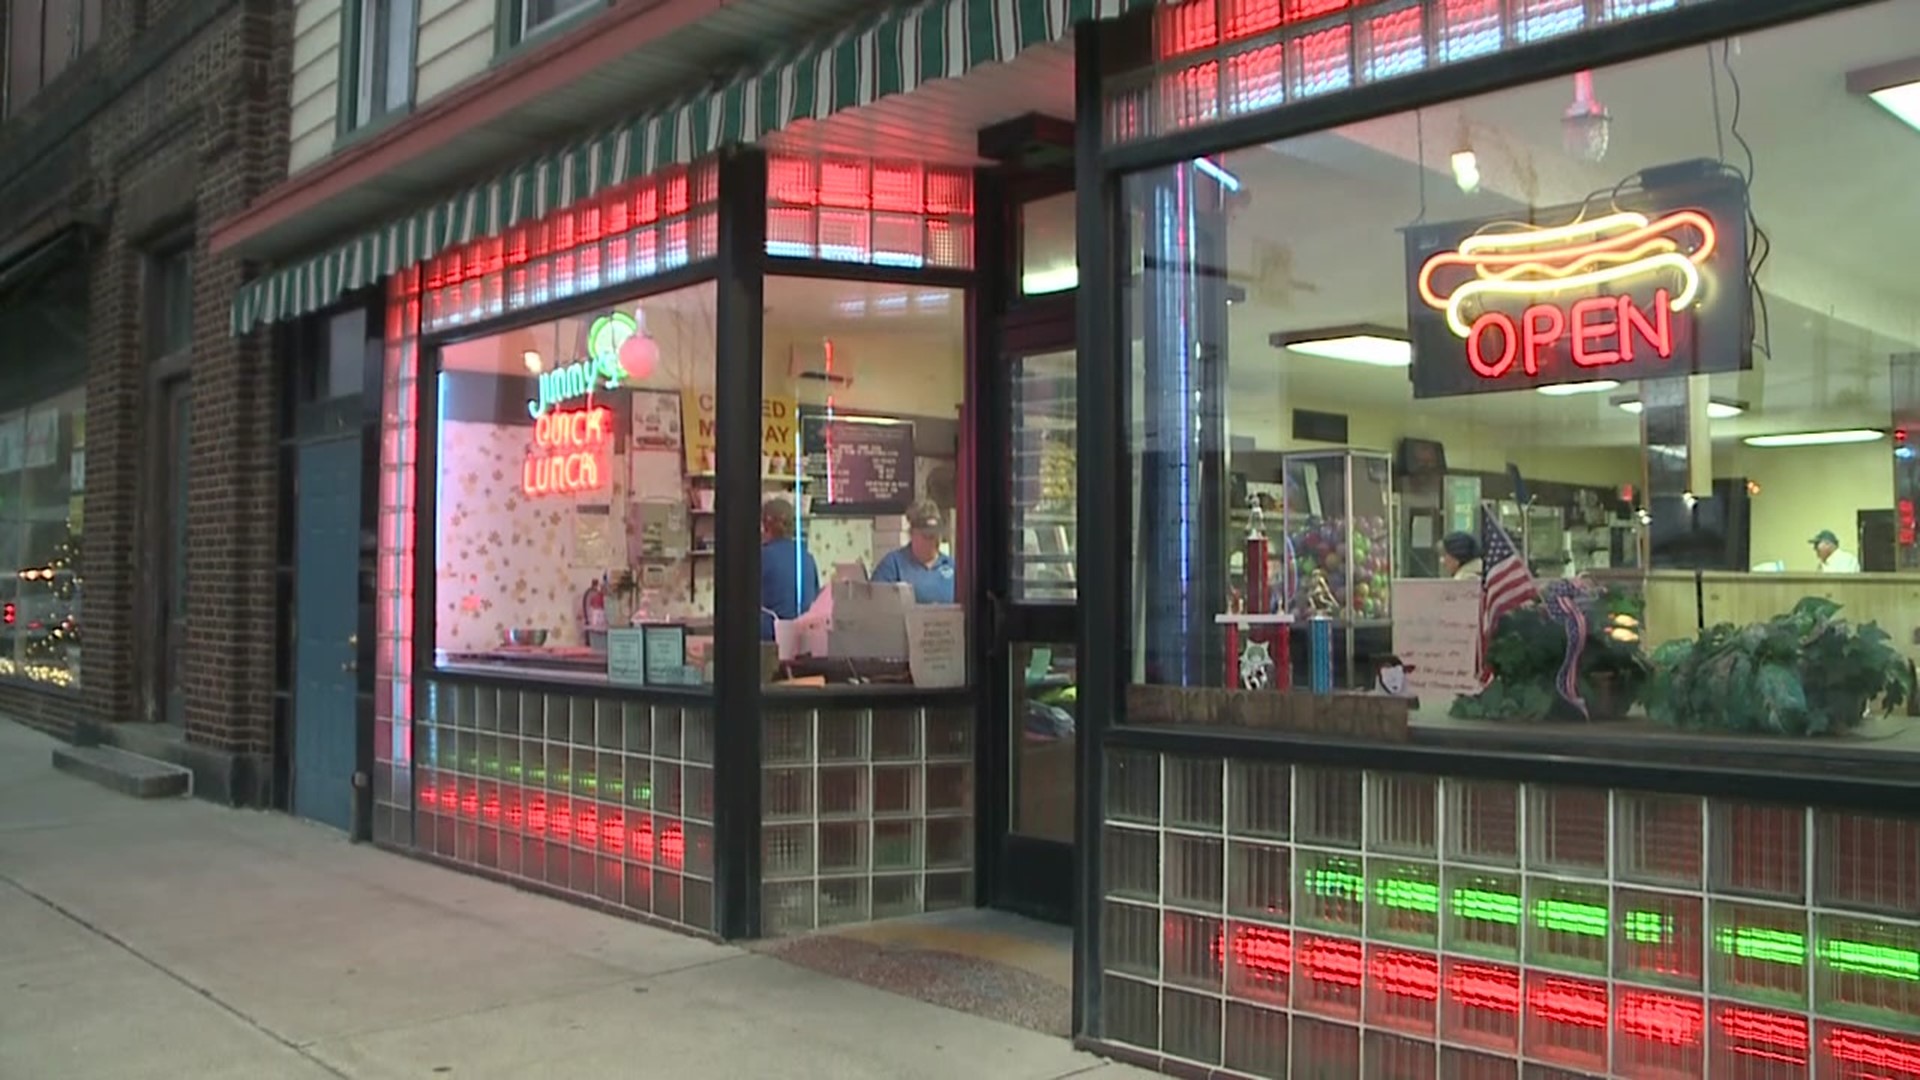 The hot dog restaurant has been serving up hot dogs and other good eats in a unique way for more than 85 years.